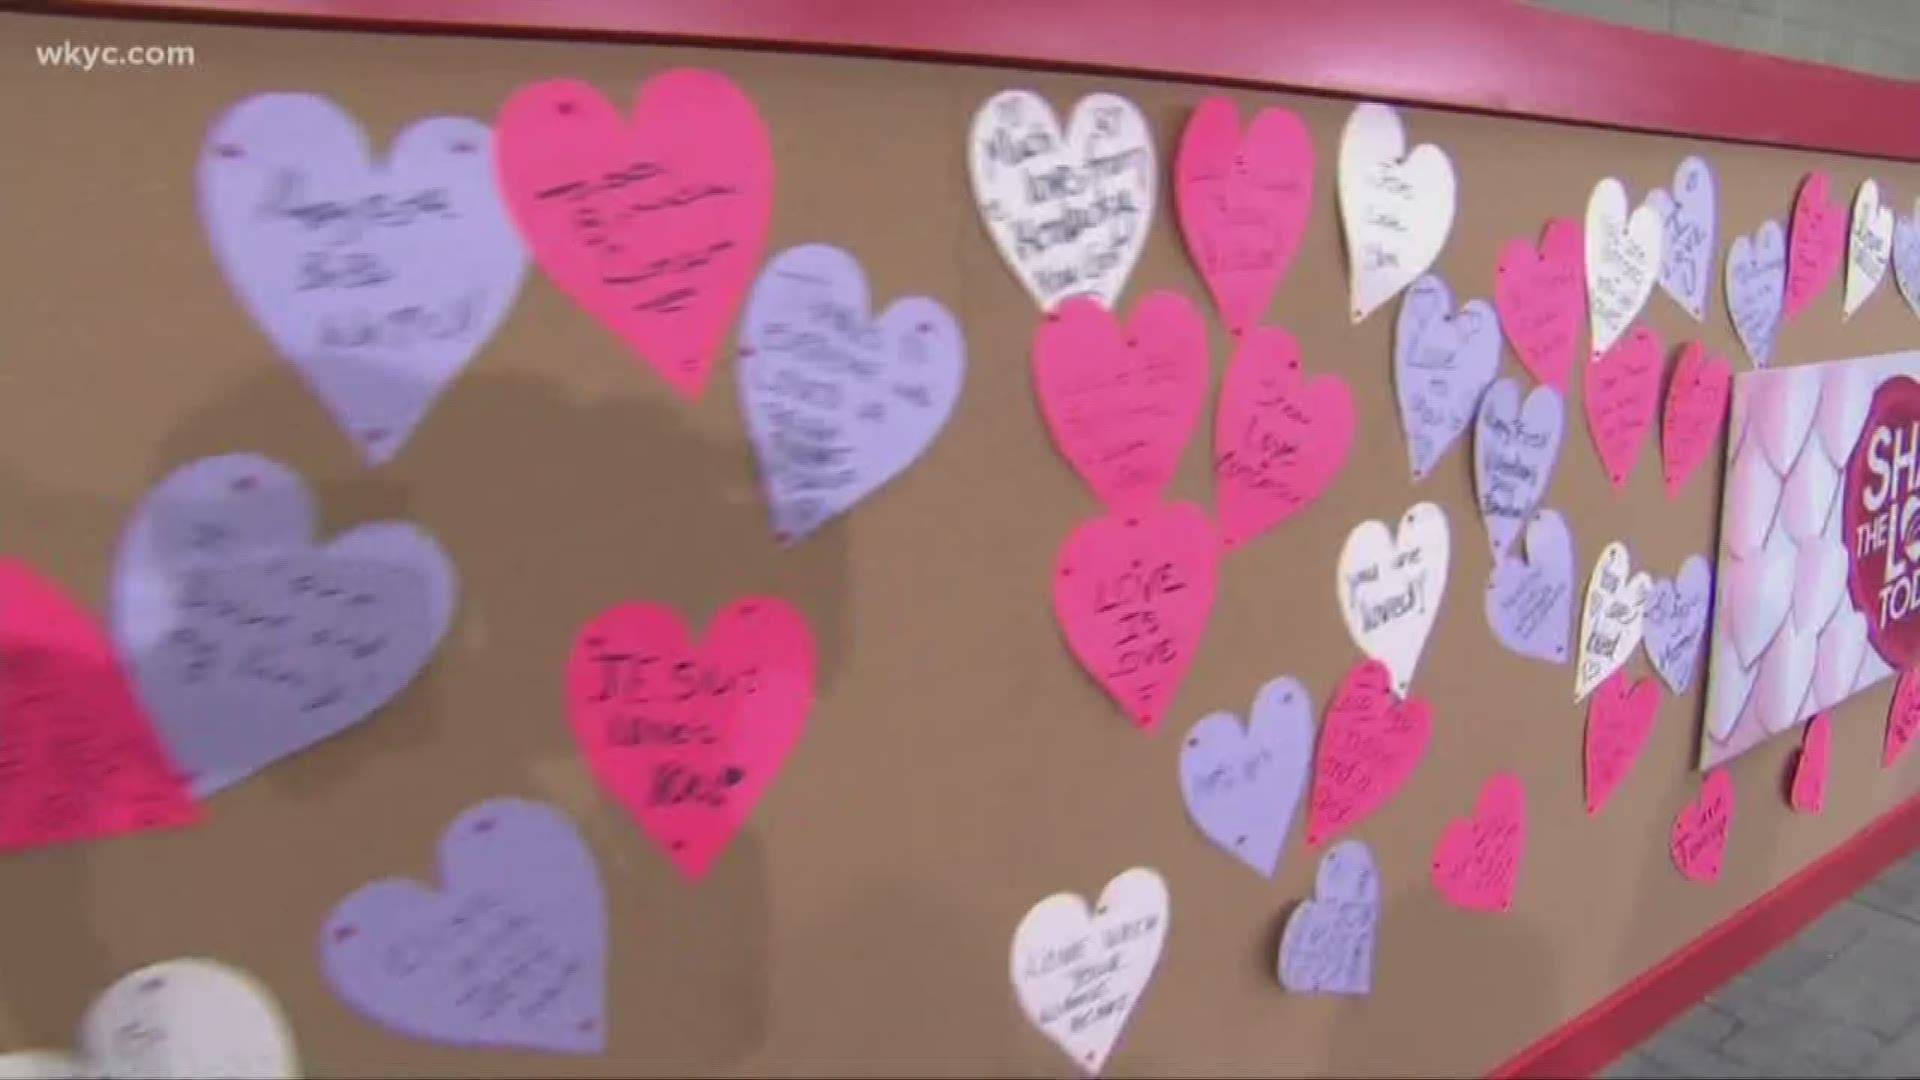 Feb. 12, 2019: This Valentine’s week, the Today show and WKYC are partnering to write love letters that will be delivered to the Ronald McDonald House. Here's how you can get involved.